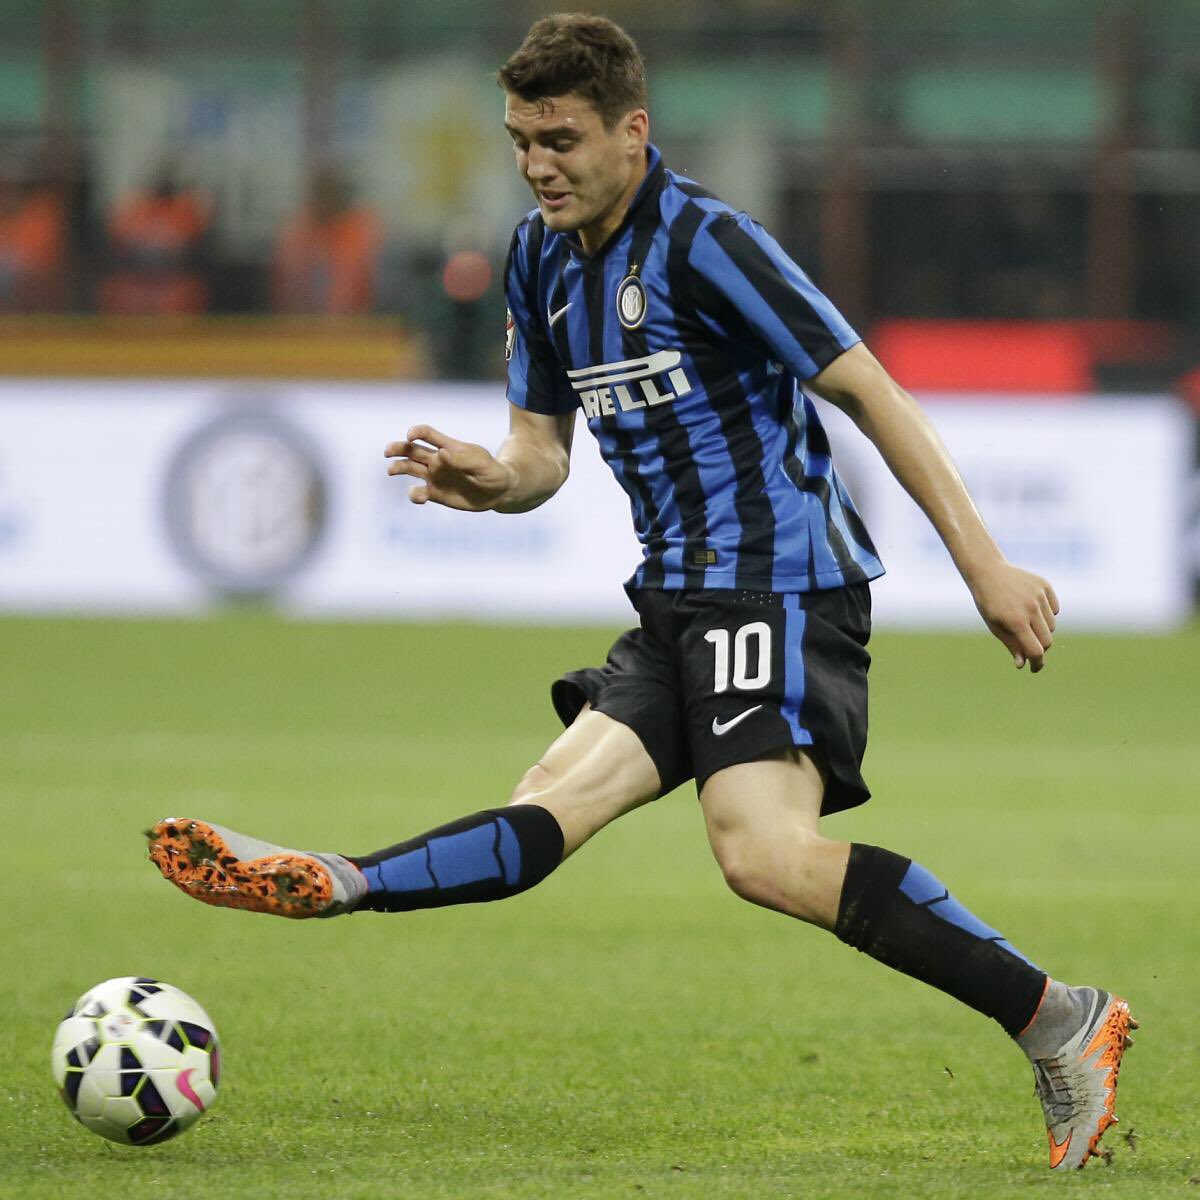 He then moved to Inter Milan on January 31 2013 (Unknown fee). Mateo wore the number 10 jersey at Inter (Previously worn by Weislej Sneijder). He made his debut for Inter against AC Siena 4 days after his arrival.4/11